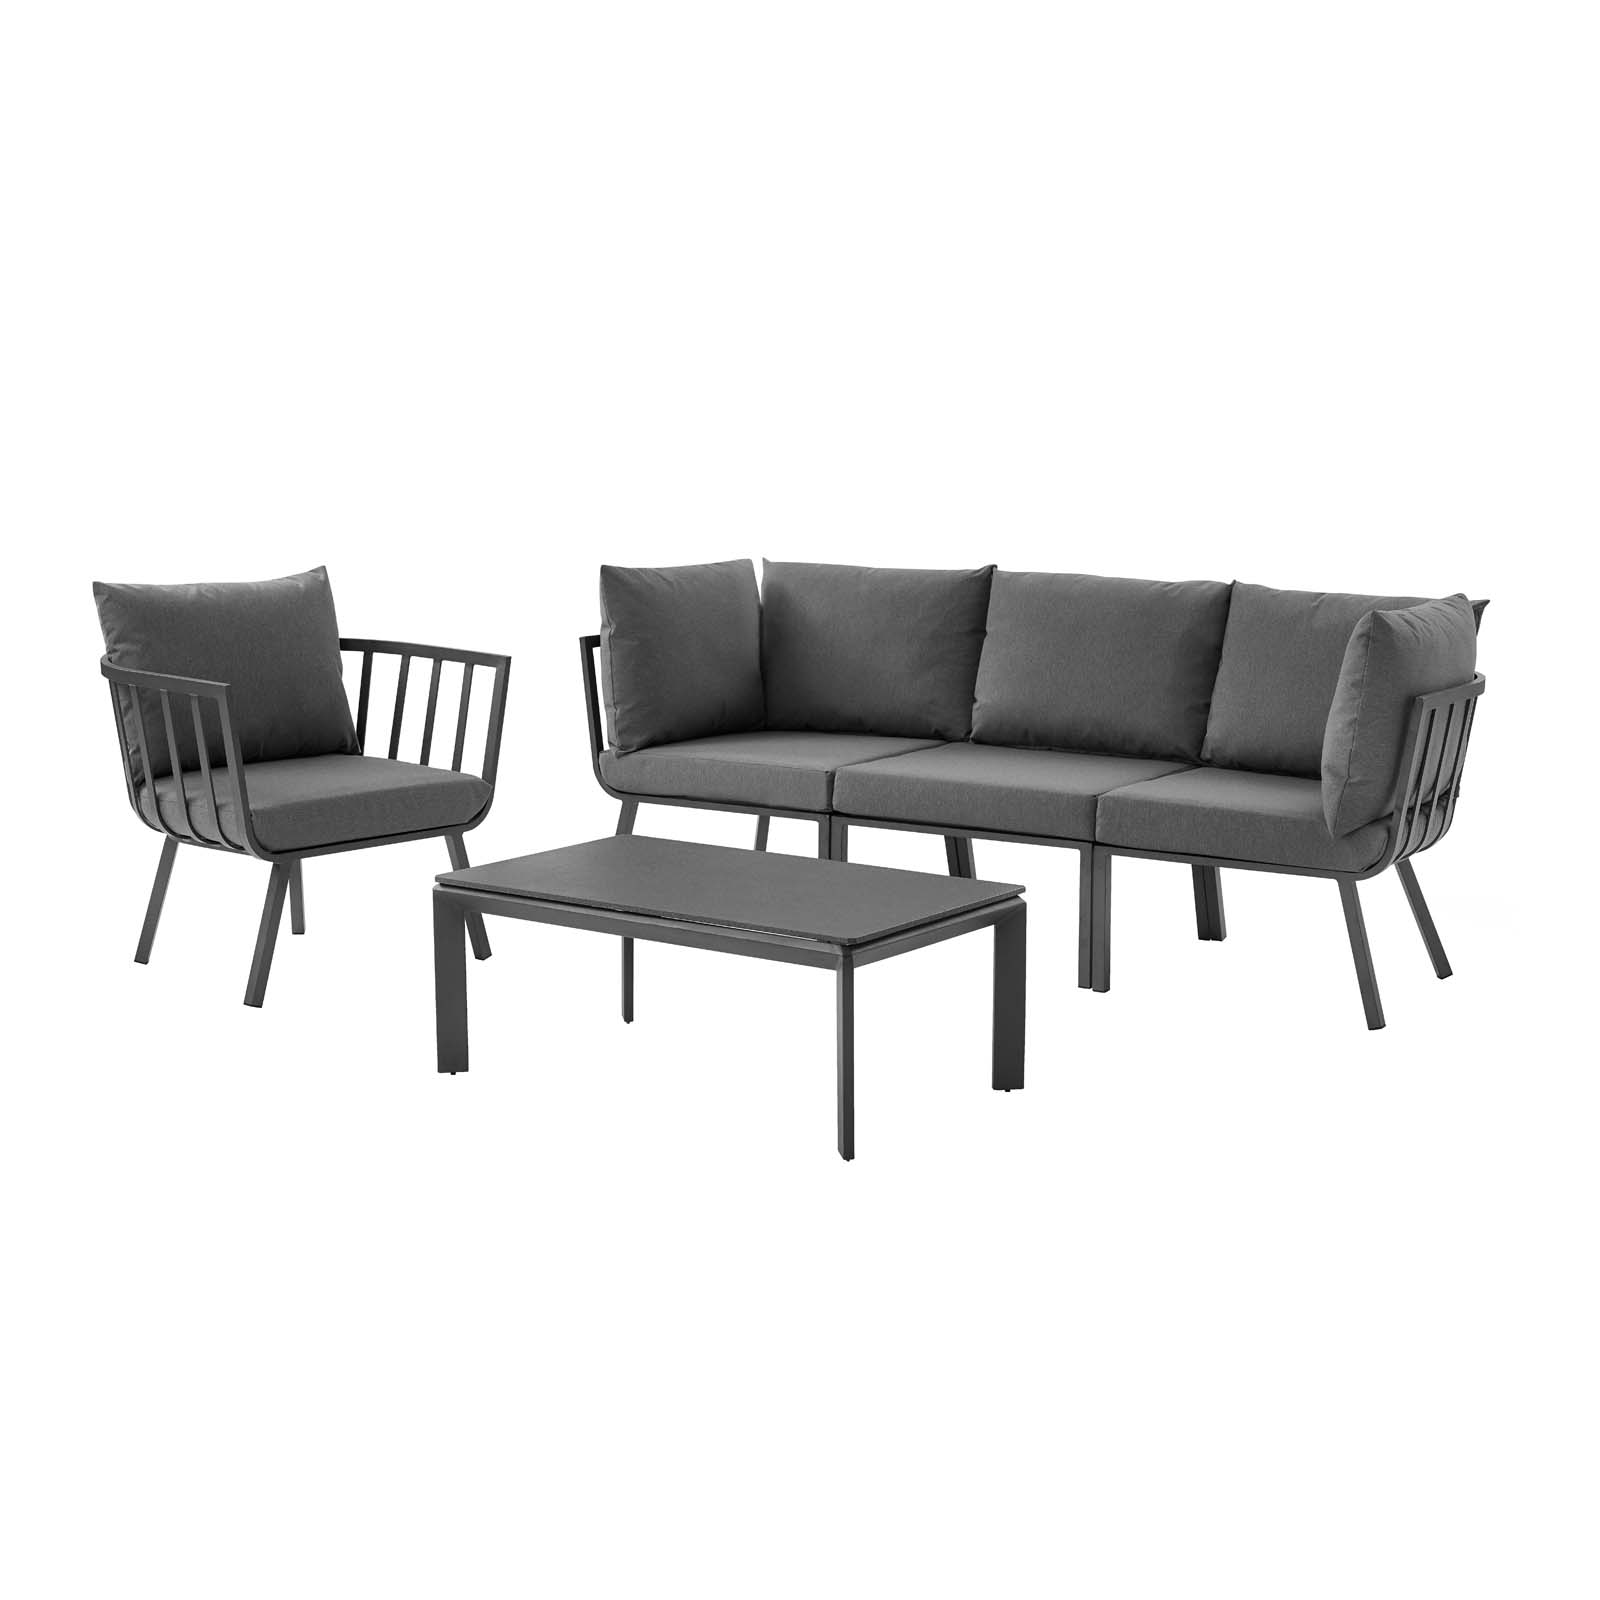 Lounge Sectional Sofa Chair Set, Aluminum, Metal, Steel, Grey Gray, Modern Contemporary Urban Design, Outdoor Patio Balcony Cafe Bistro Garden Furniture Hotel Hospitality - image 1 of 10